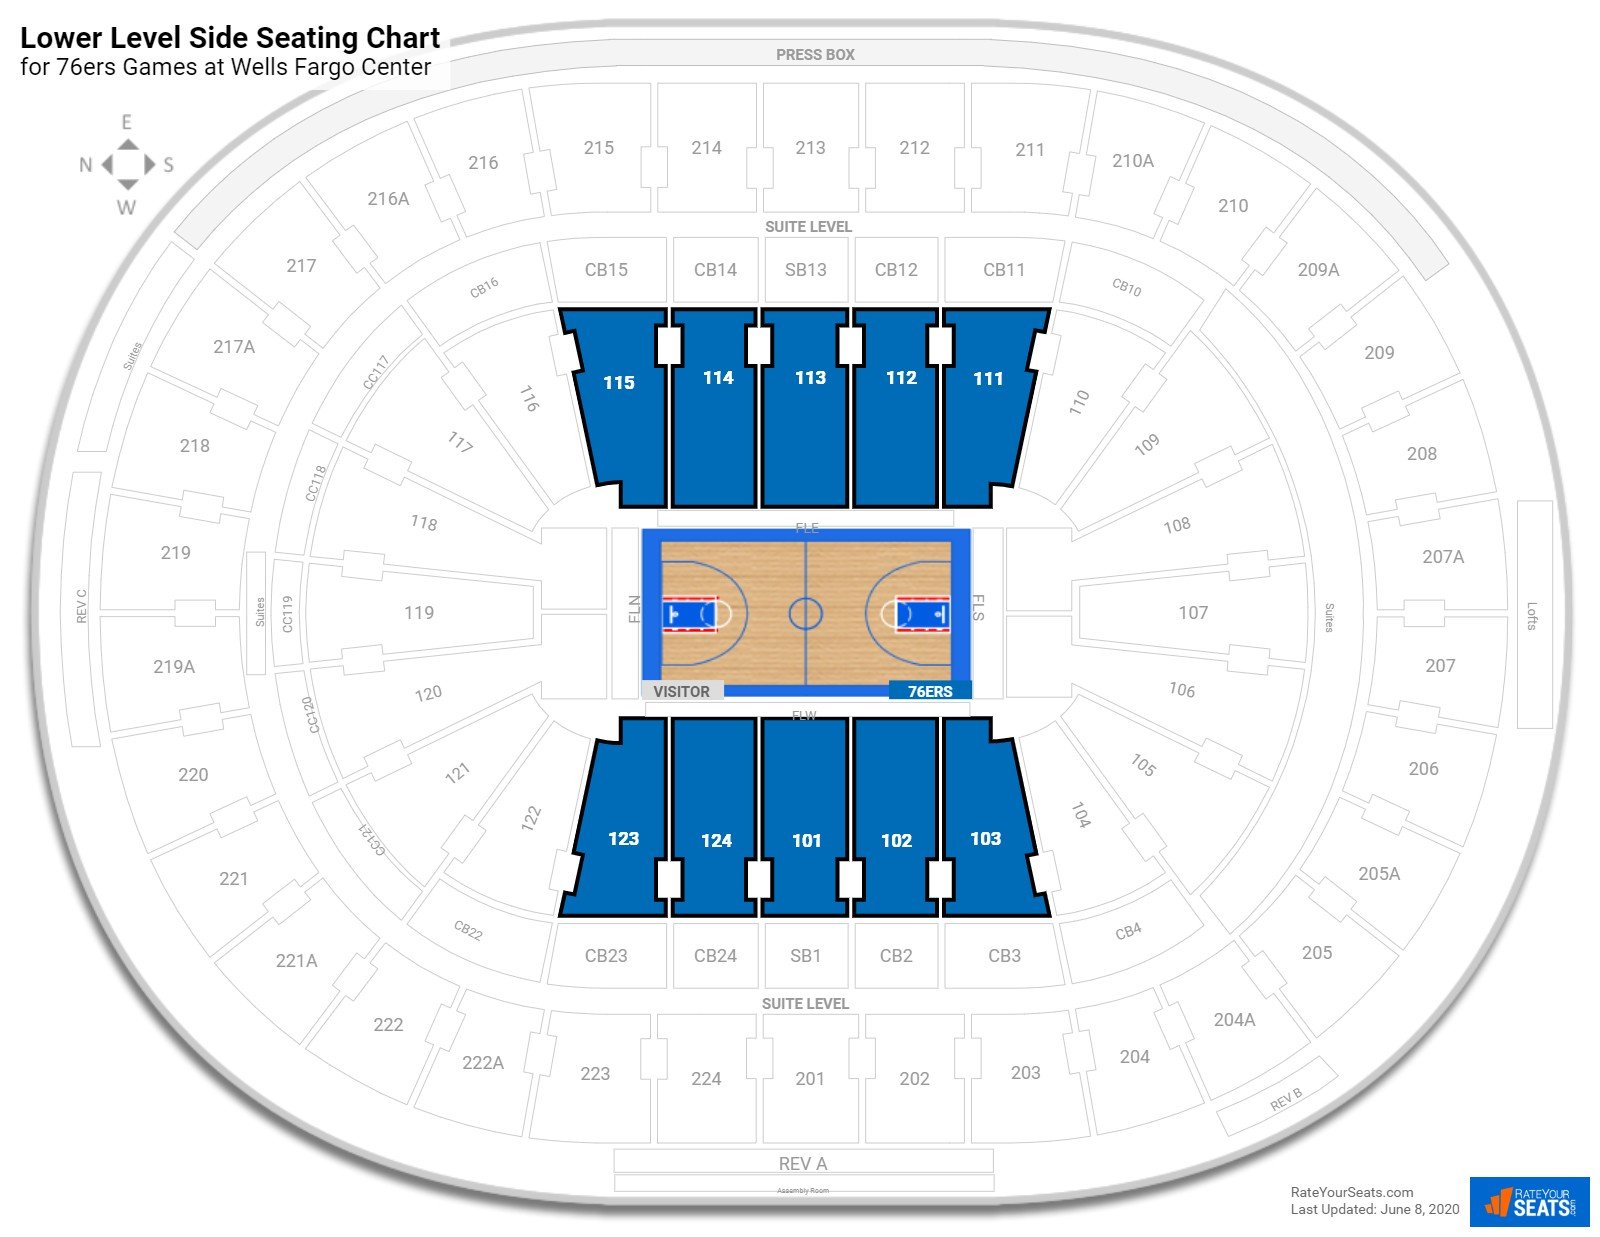 Lower Level Side - Wells Fargo Center Basketball Seating - RateYourSeats.com1600 x 1236